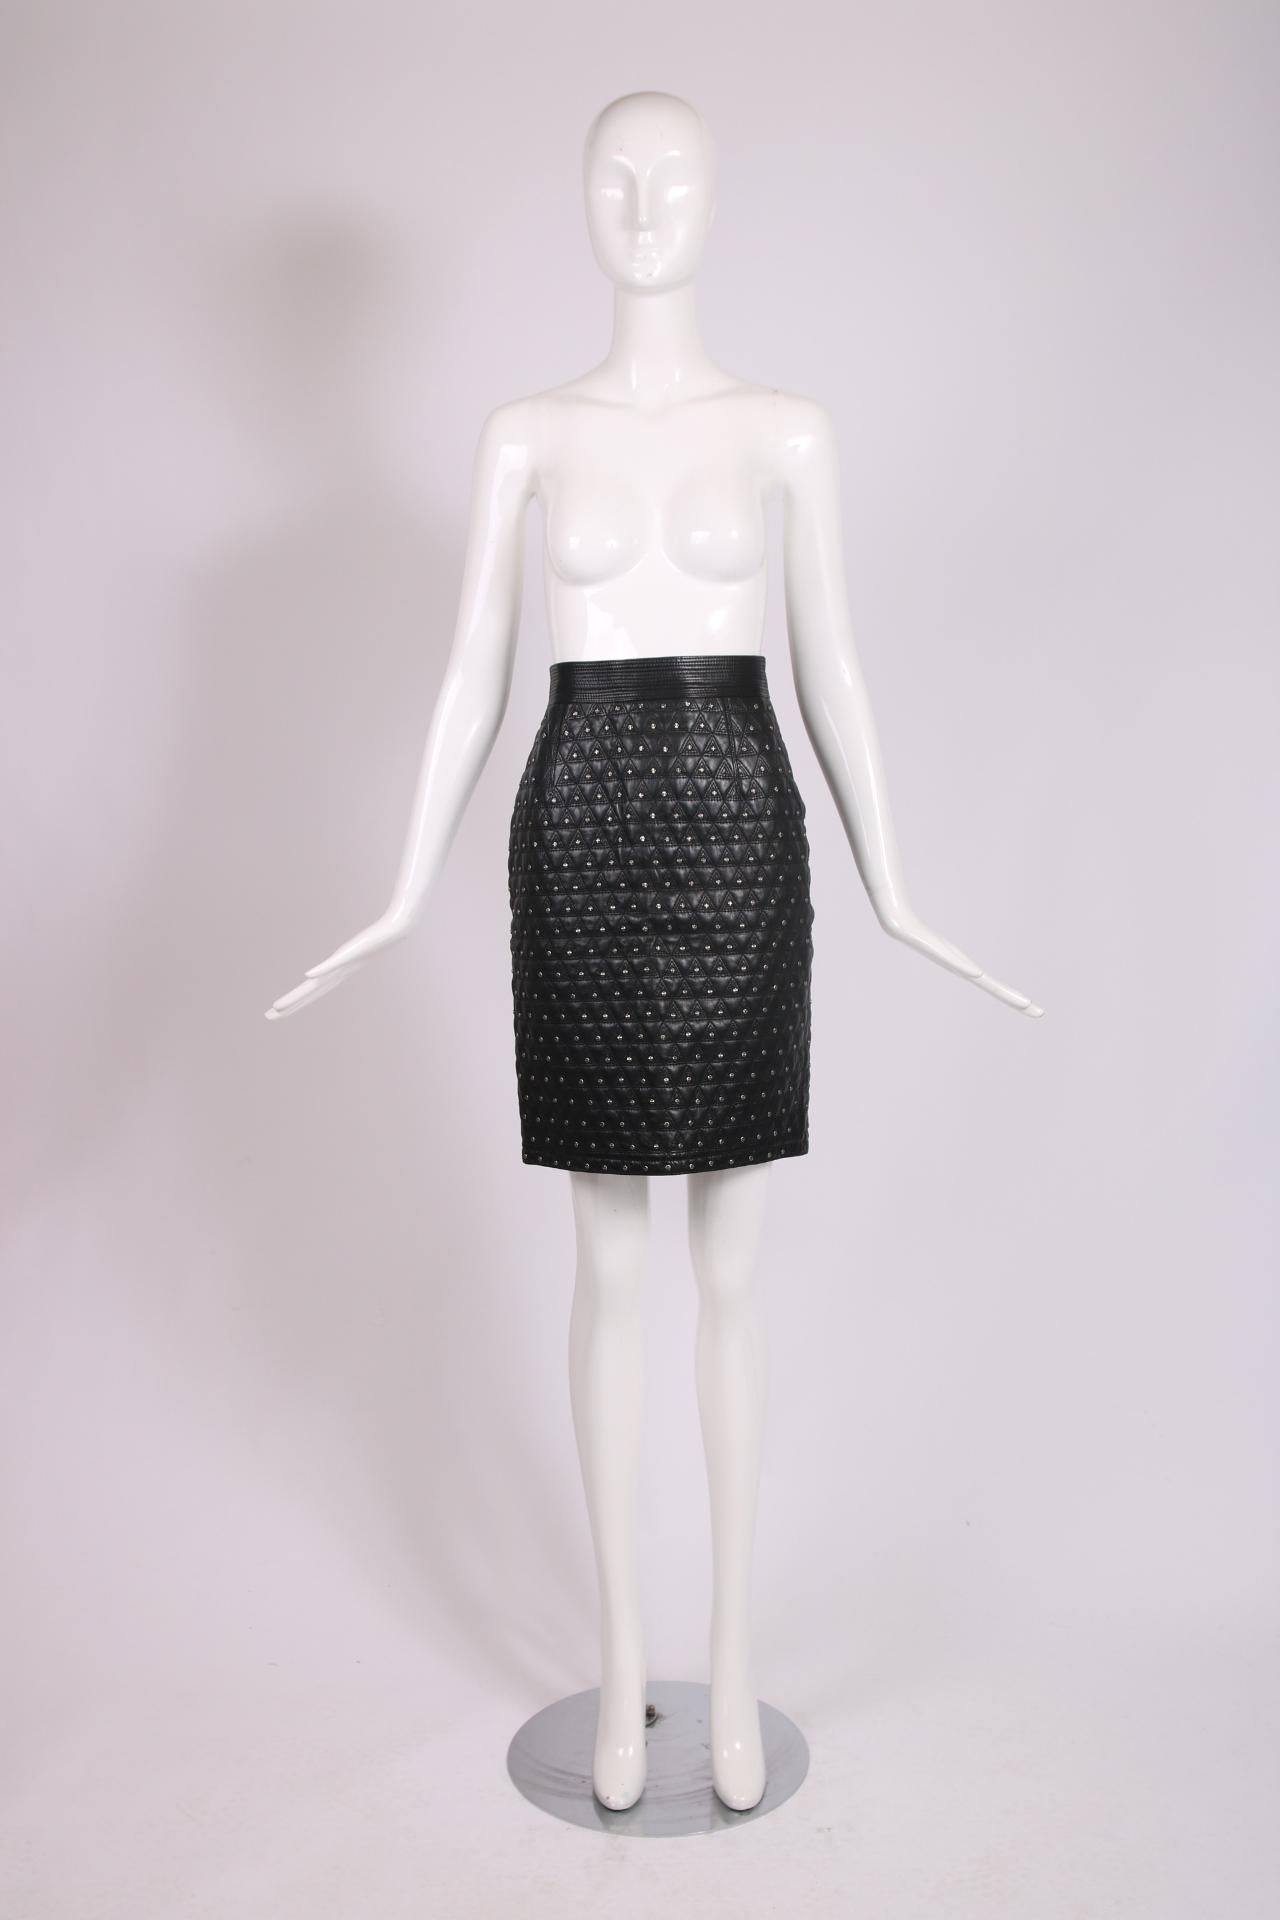 1989 F/W Gianni Versace black leather skirt quilted in a pattern of repeating adjacent, stacked triangles and embellished with textured silvertone studs. Skirt features an overstitched waistband, a 4 1/2